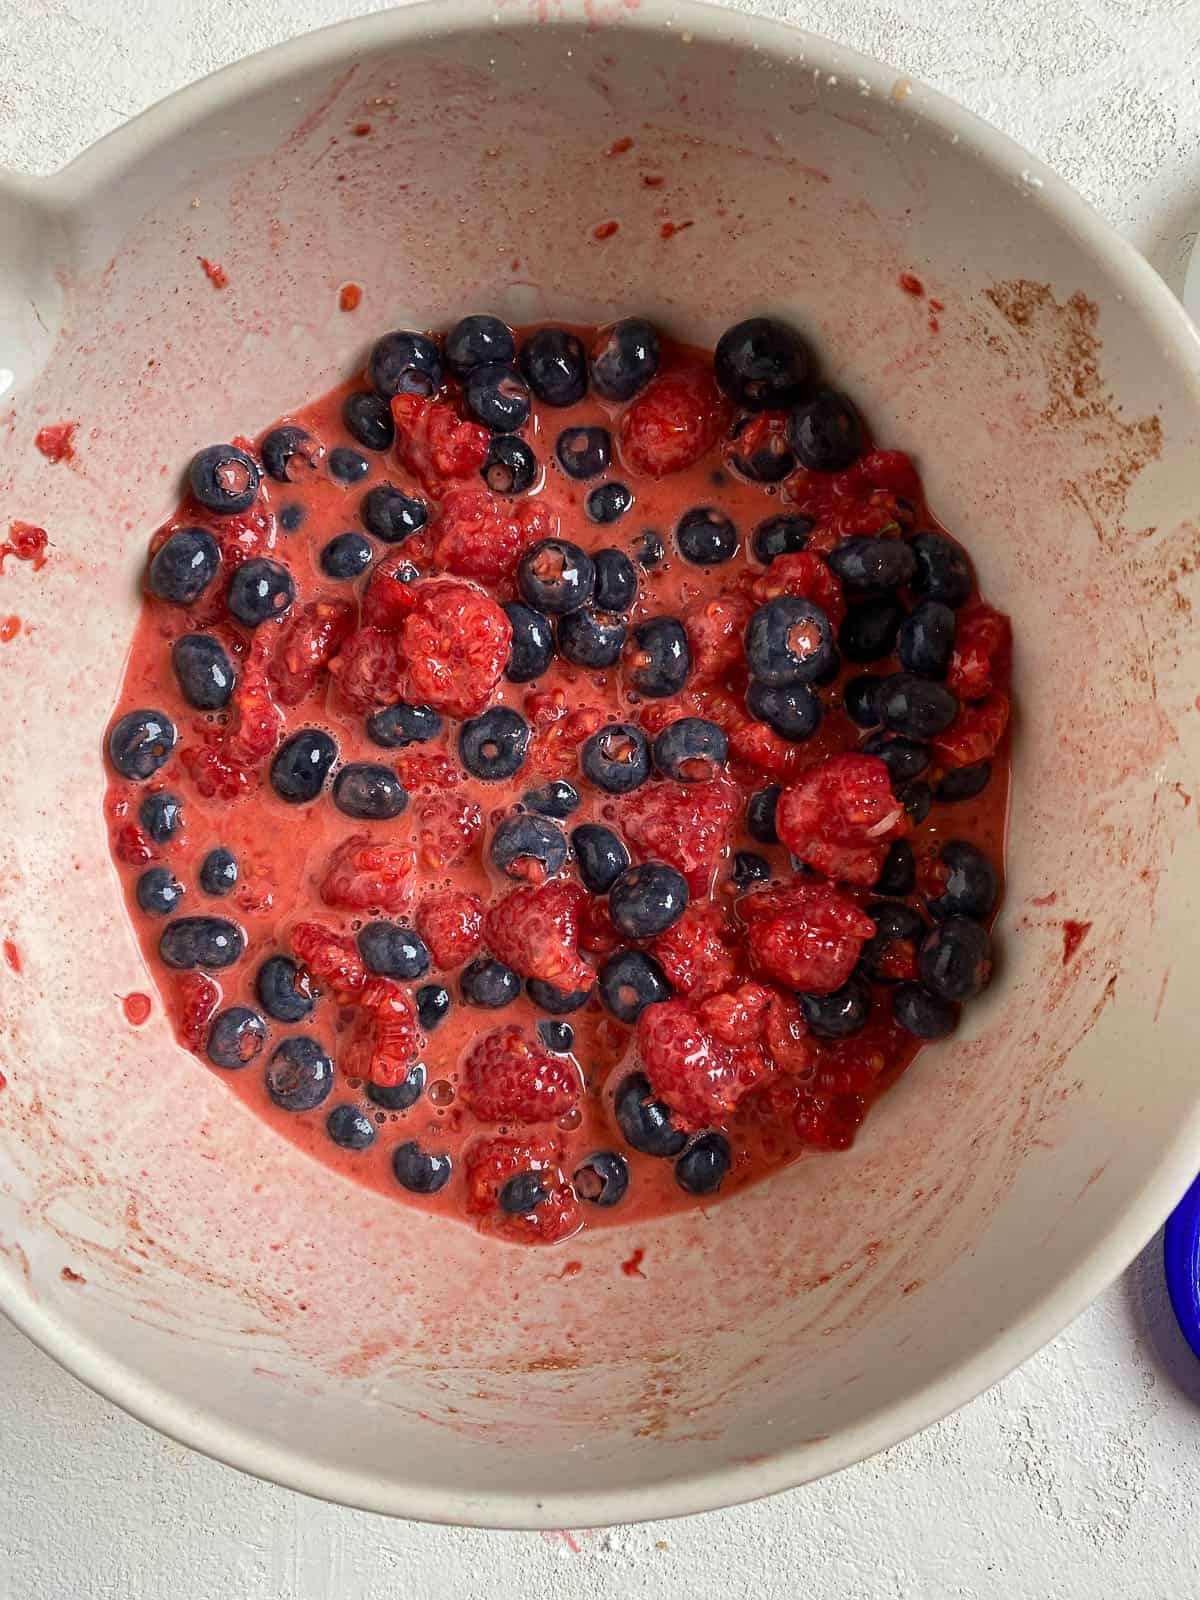 process shot of berries being added to a bowl